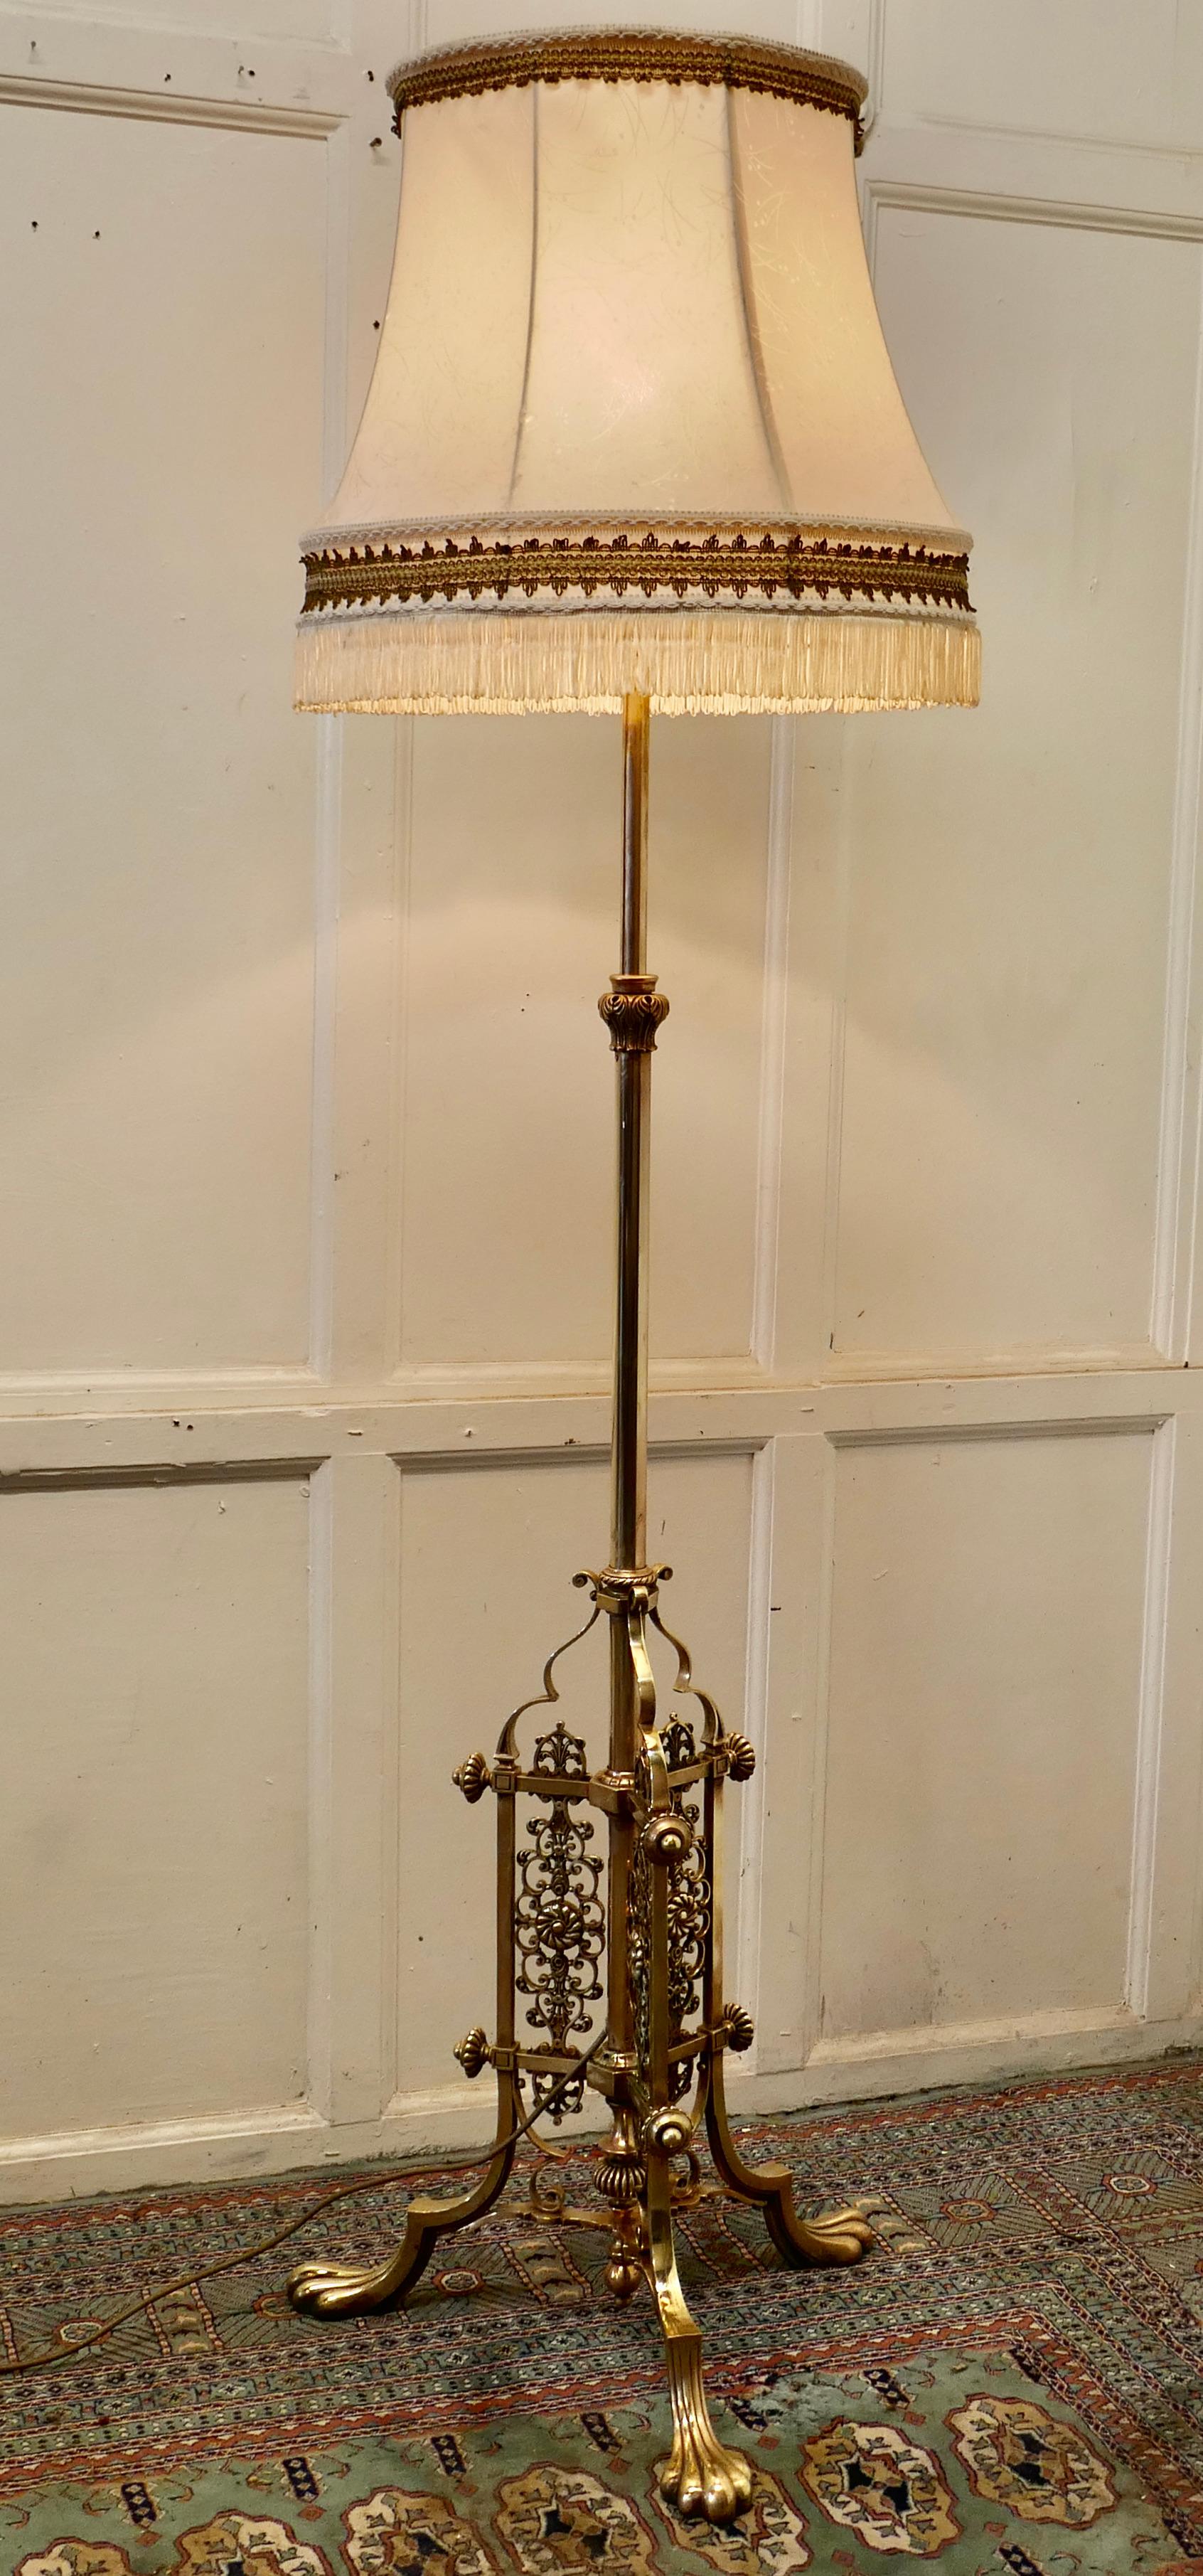 Superb French brass Art Nouveau telescopic standard lamp

This is a very good quality and attractive piece, the lamp has a telescopic action which can be extended to raise or lower the height of the lamp , it has a decorative brass base with large